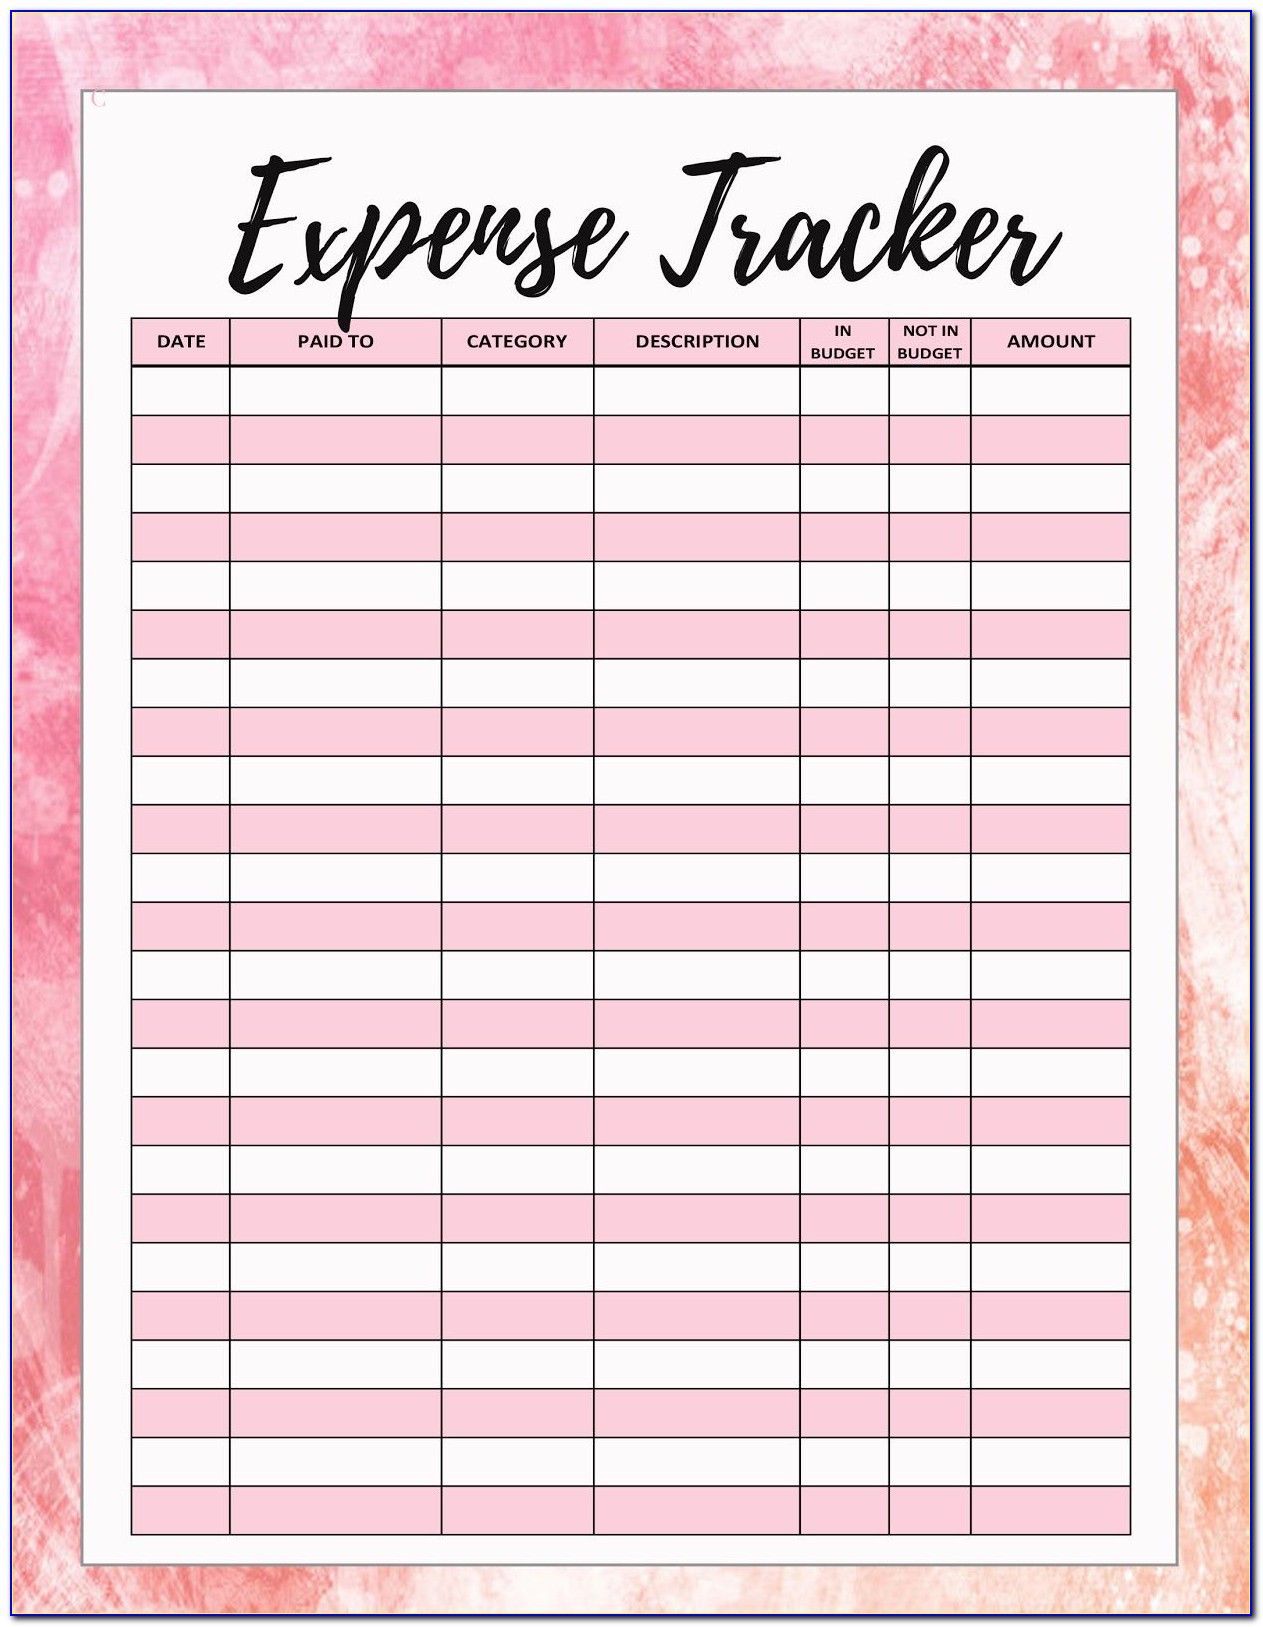 Expense Tracker Template Free